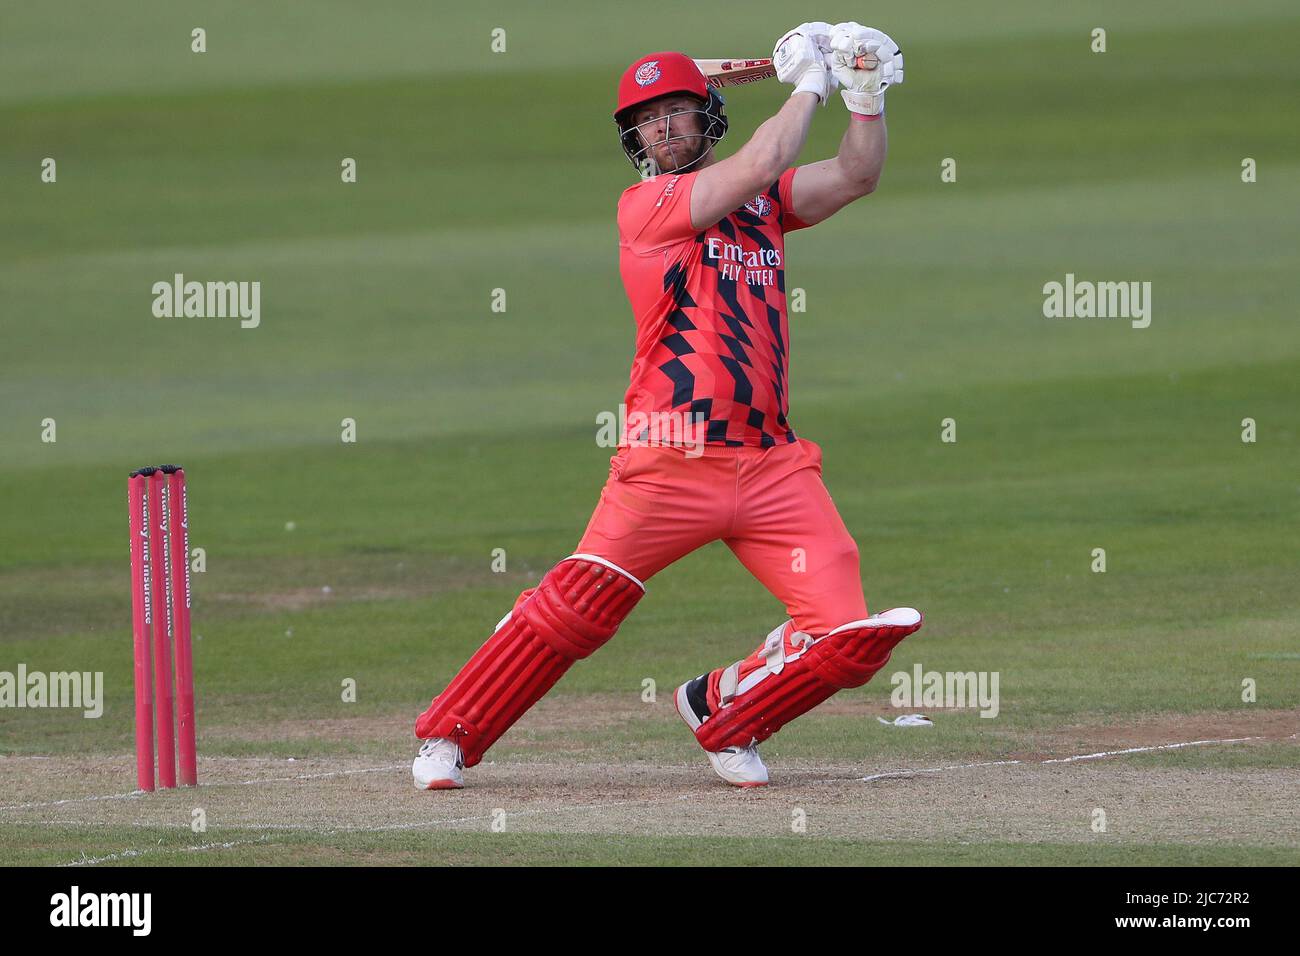 CHESTER LE STREET, UK JUN 10TH Lancashire's Steven Croft batting during the Vitality Blast T20 match between Durham County Cricket Club and Lancashire at the Seat Unique Riverside, Chester le Street on Friday 10th June 2022. (Credit: Mark Fletcher | MI News) Credit: MI News & Sport /Alamy Live News Stock Photo